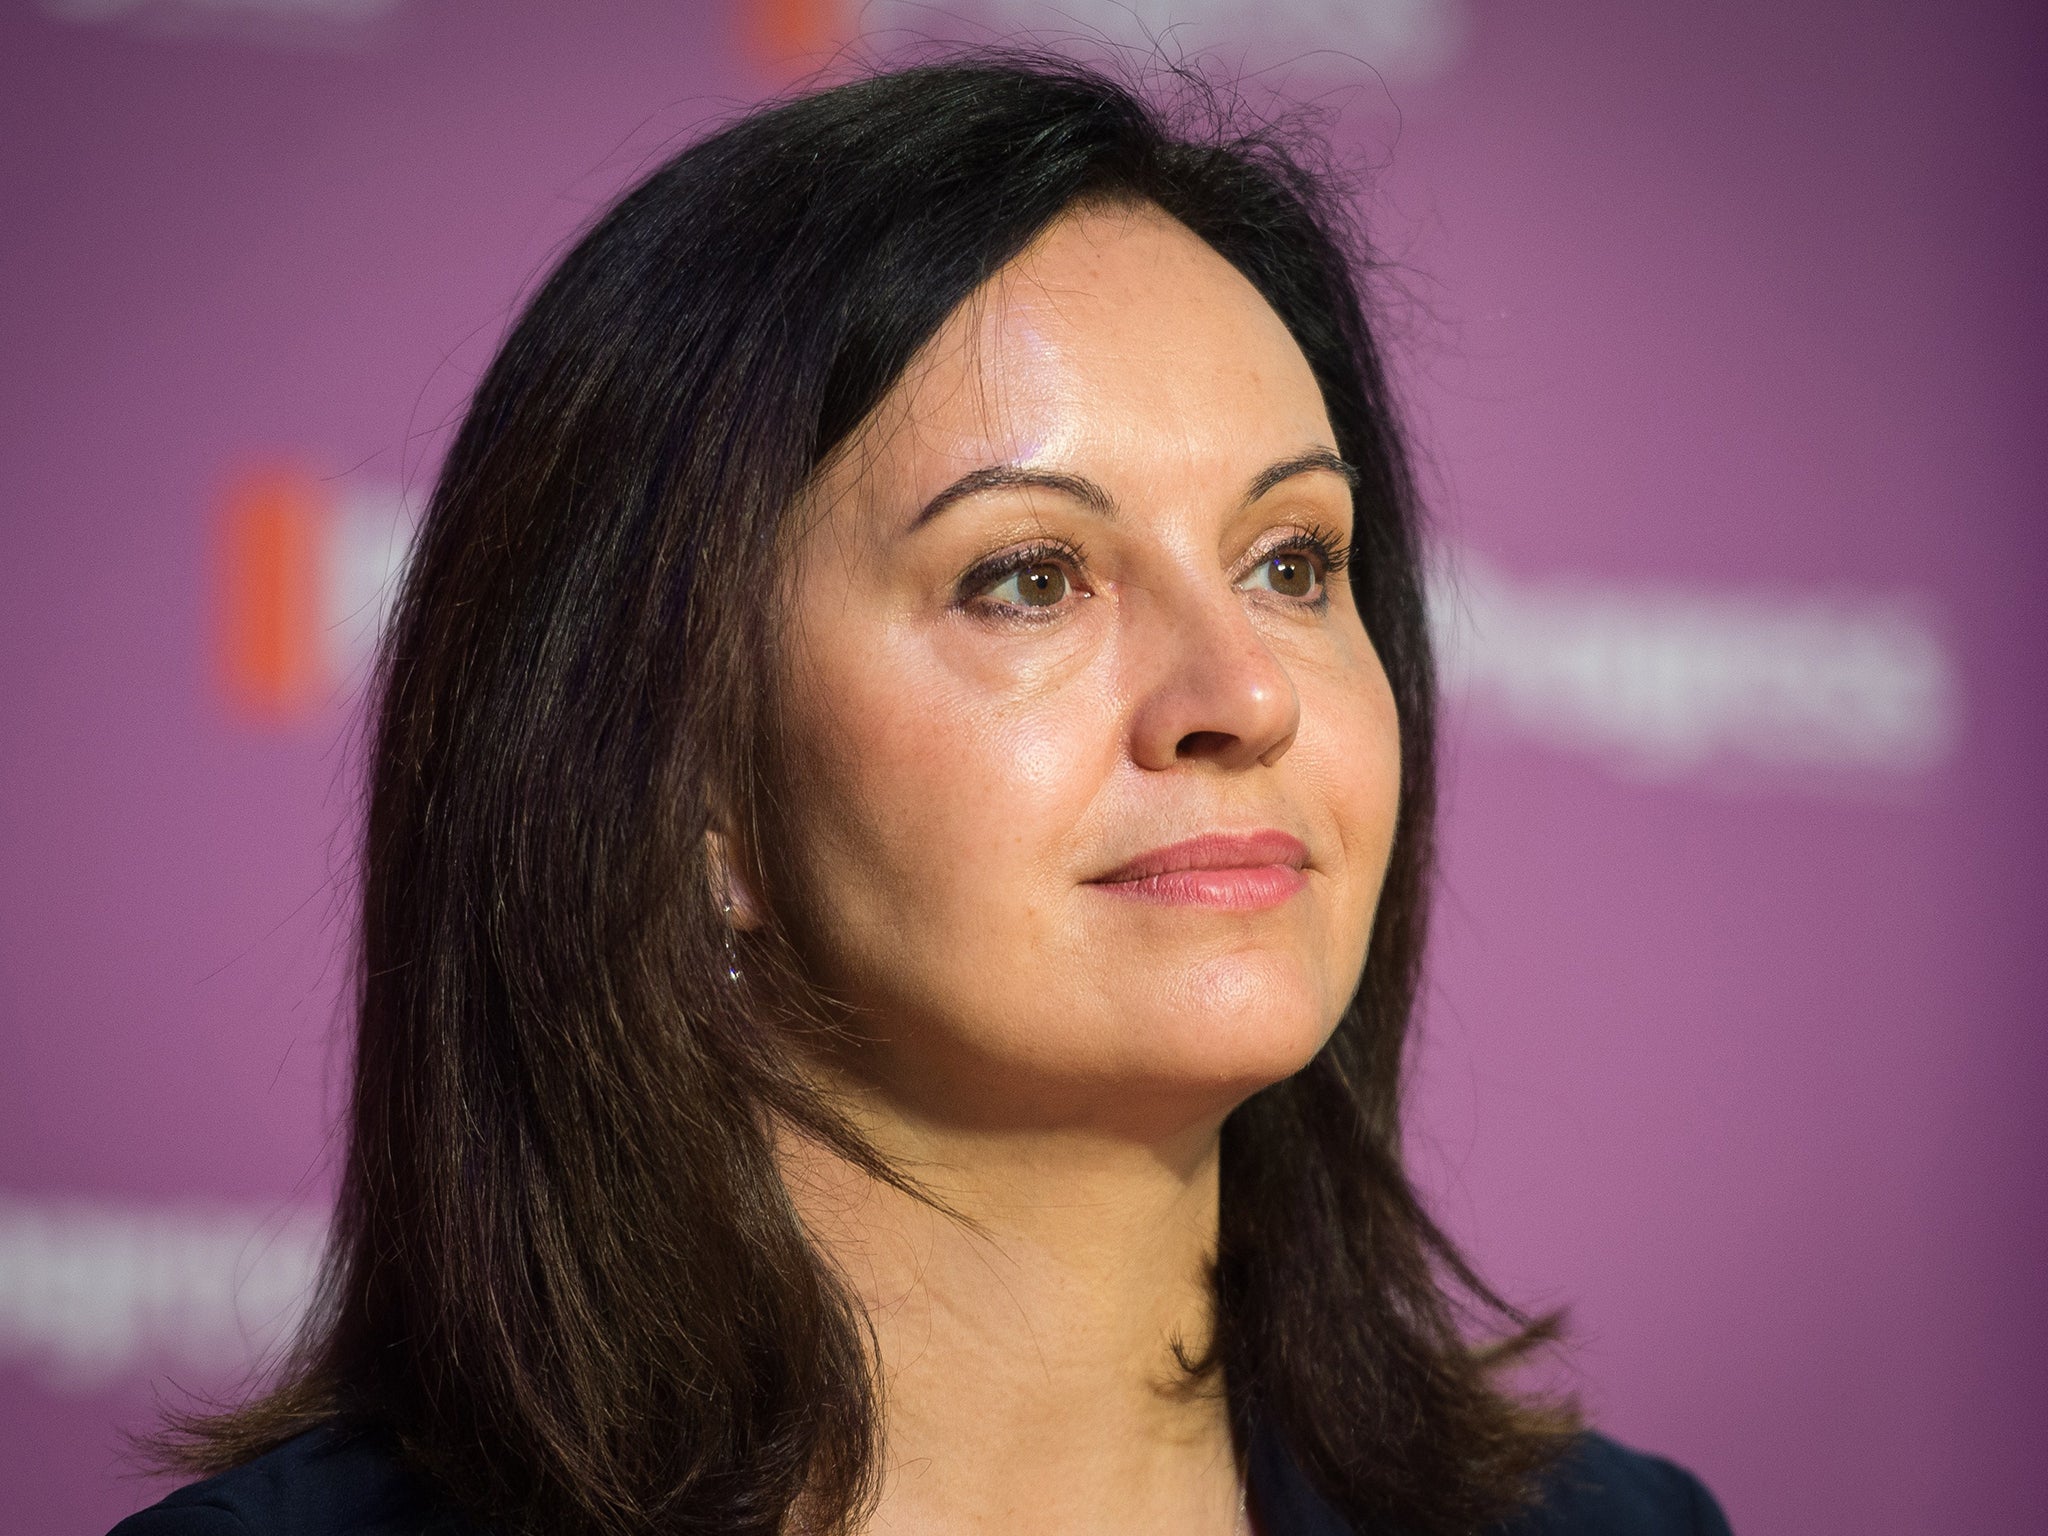 A string of MPs have switched their support from other candidates to back Caroline Flint for deputy as a centrist counterweight to Jeremy Corbyn